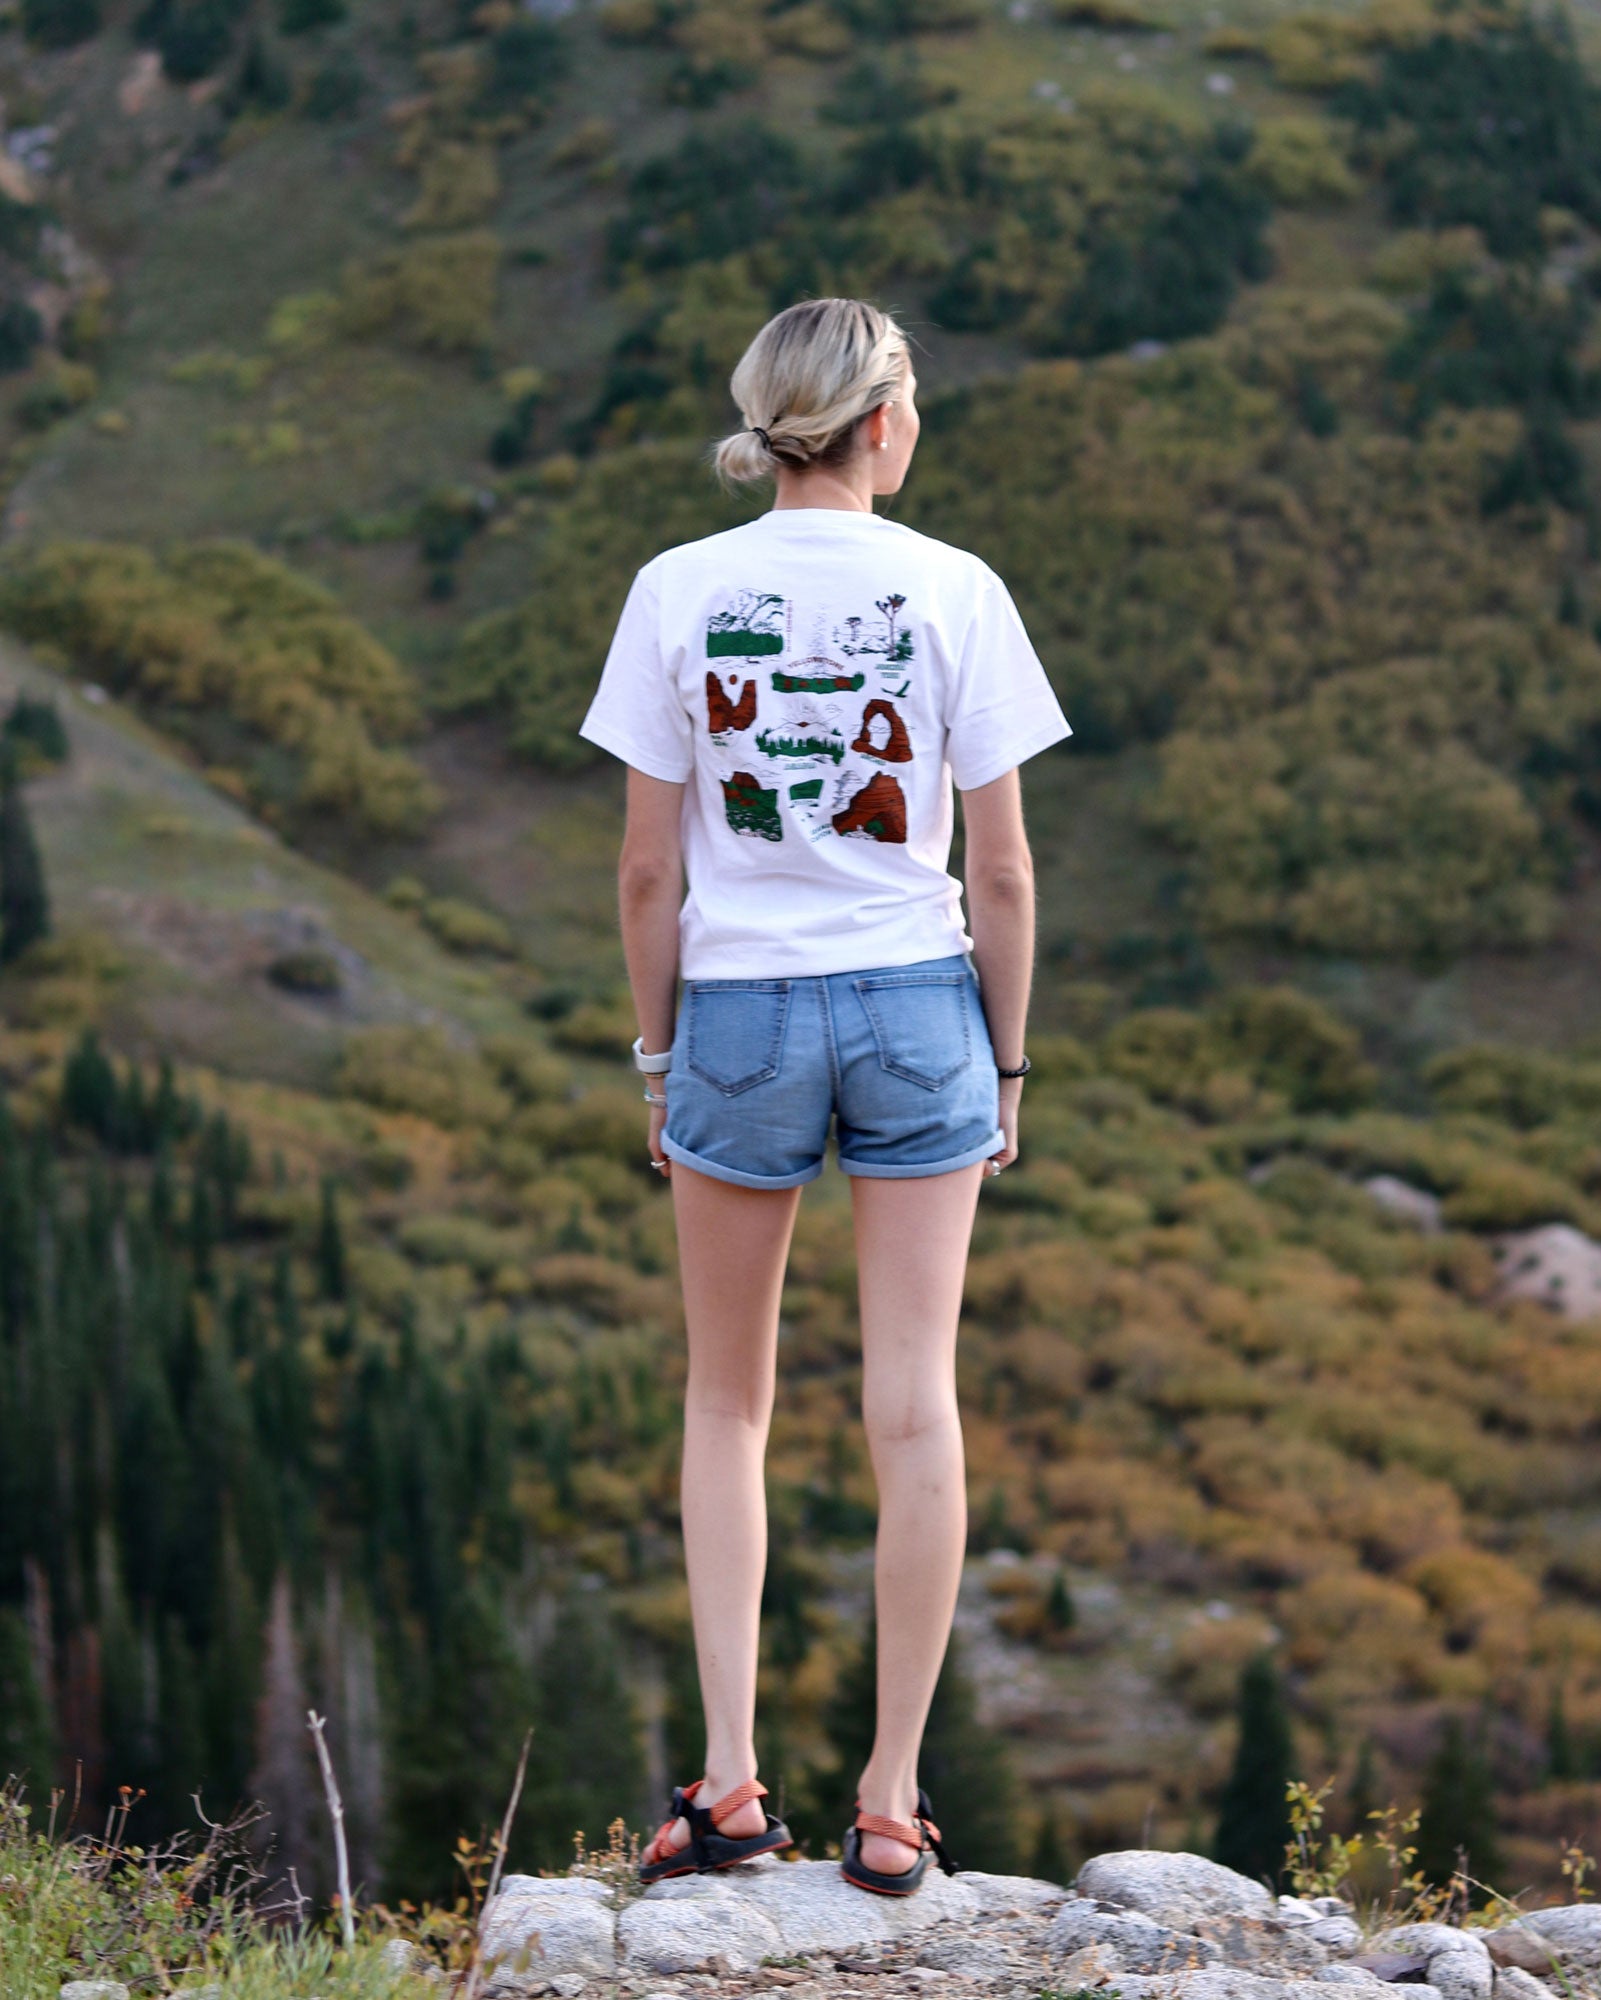 National Park Welcome Tee | Parks Project | National Park GiftShop National Park Welcome Tee Inspired by Our National Parks | white